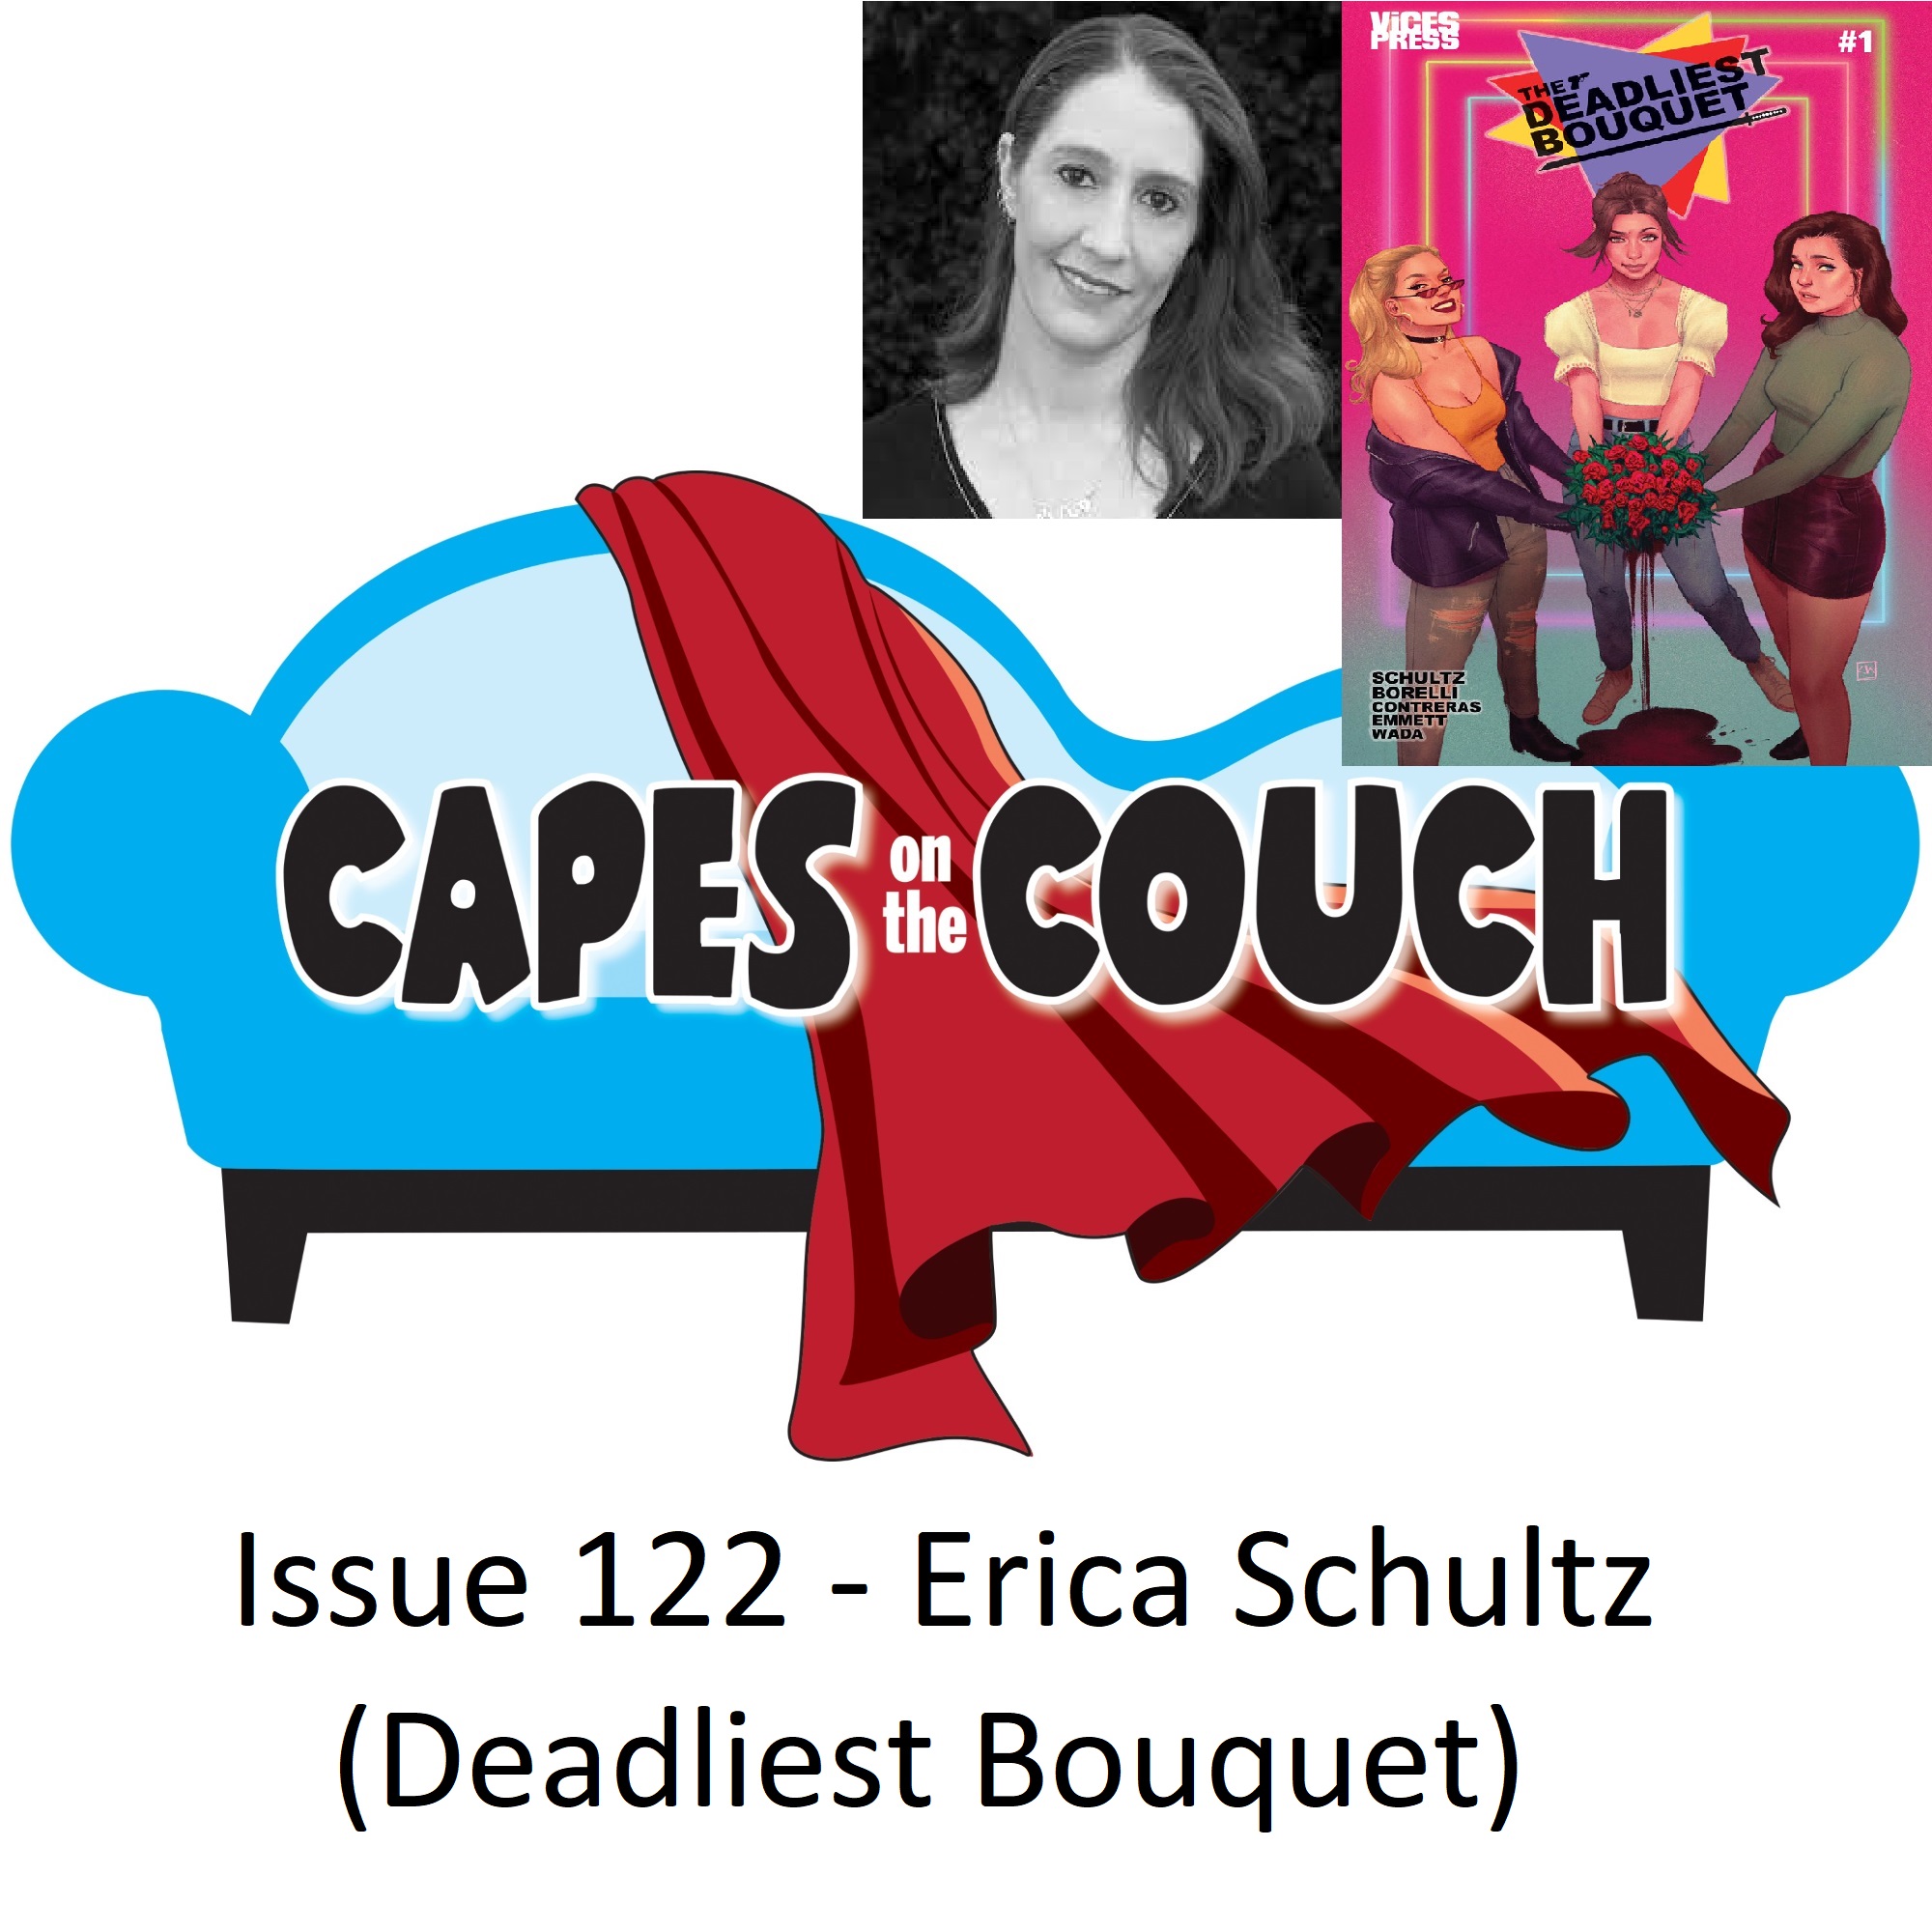 Issue 122 – Creators on the Couch – Erica Schultz Deadliest Bouquet post thumbnail image